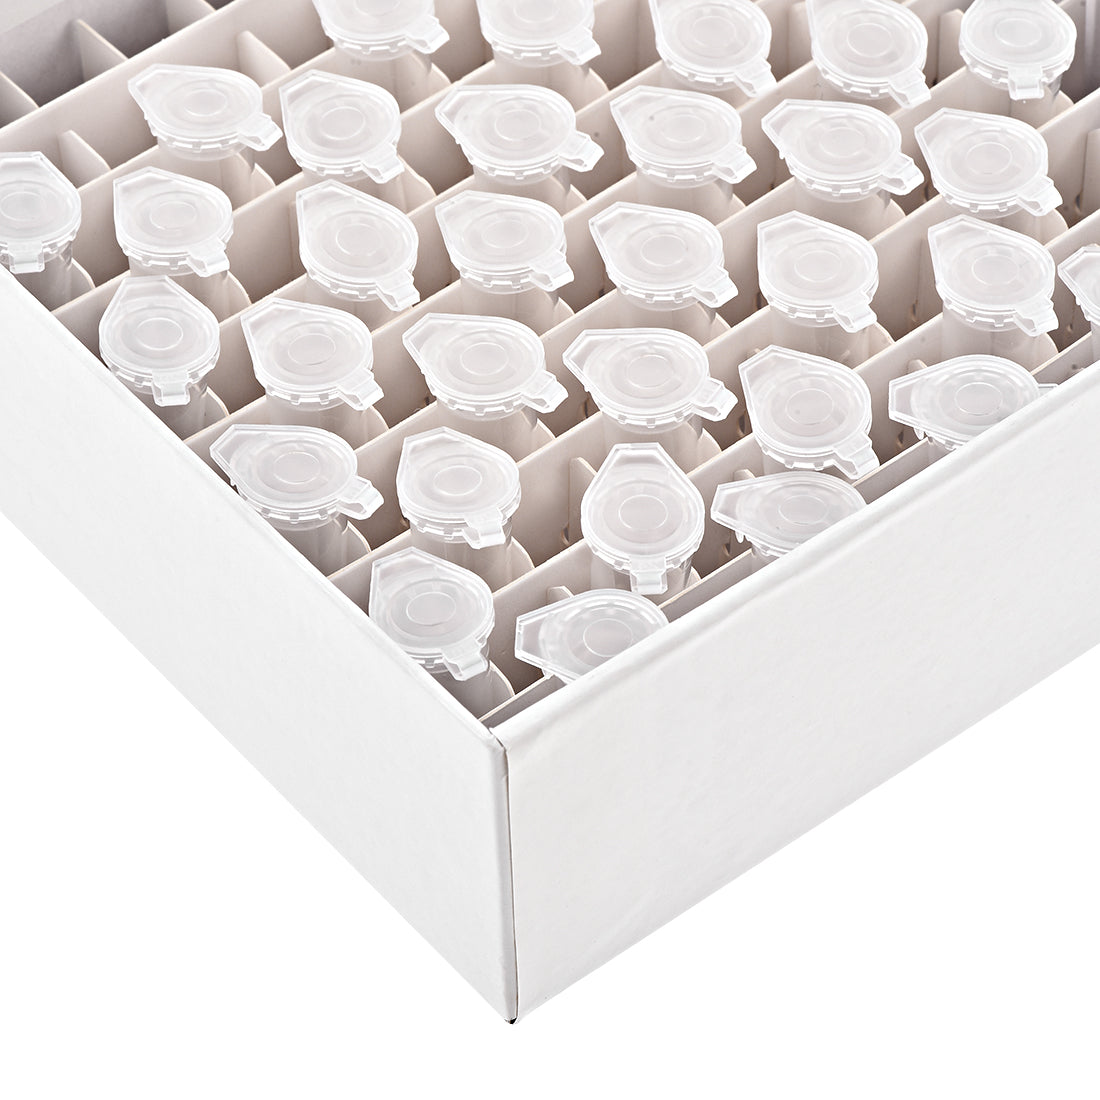 uxcell Uxcell Freezer Tube Box 100 Places Cardboard Holder Rack for 1.5/1.8/2ml Microcentrifuge Tubes 5Pcs